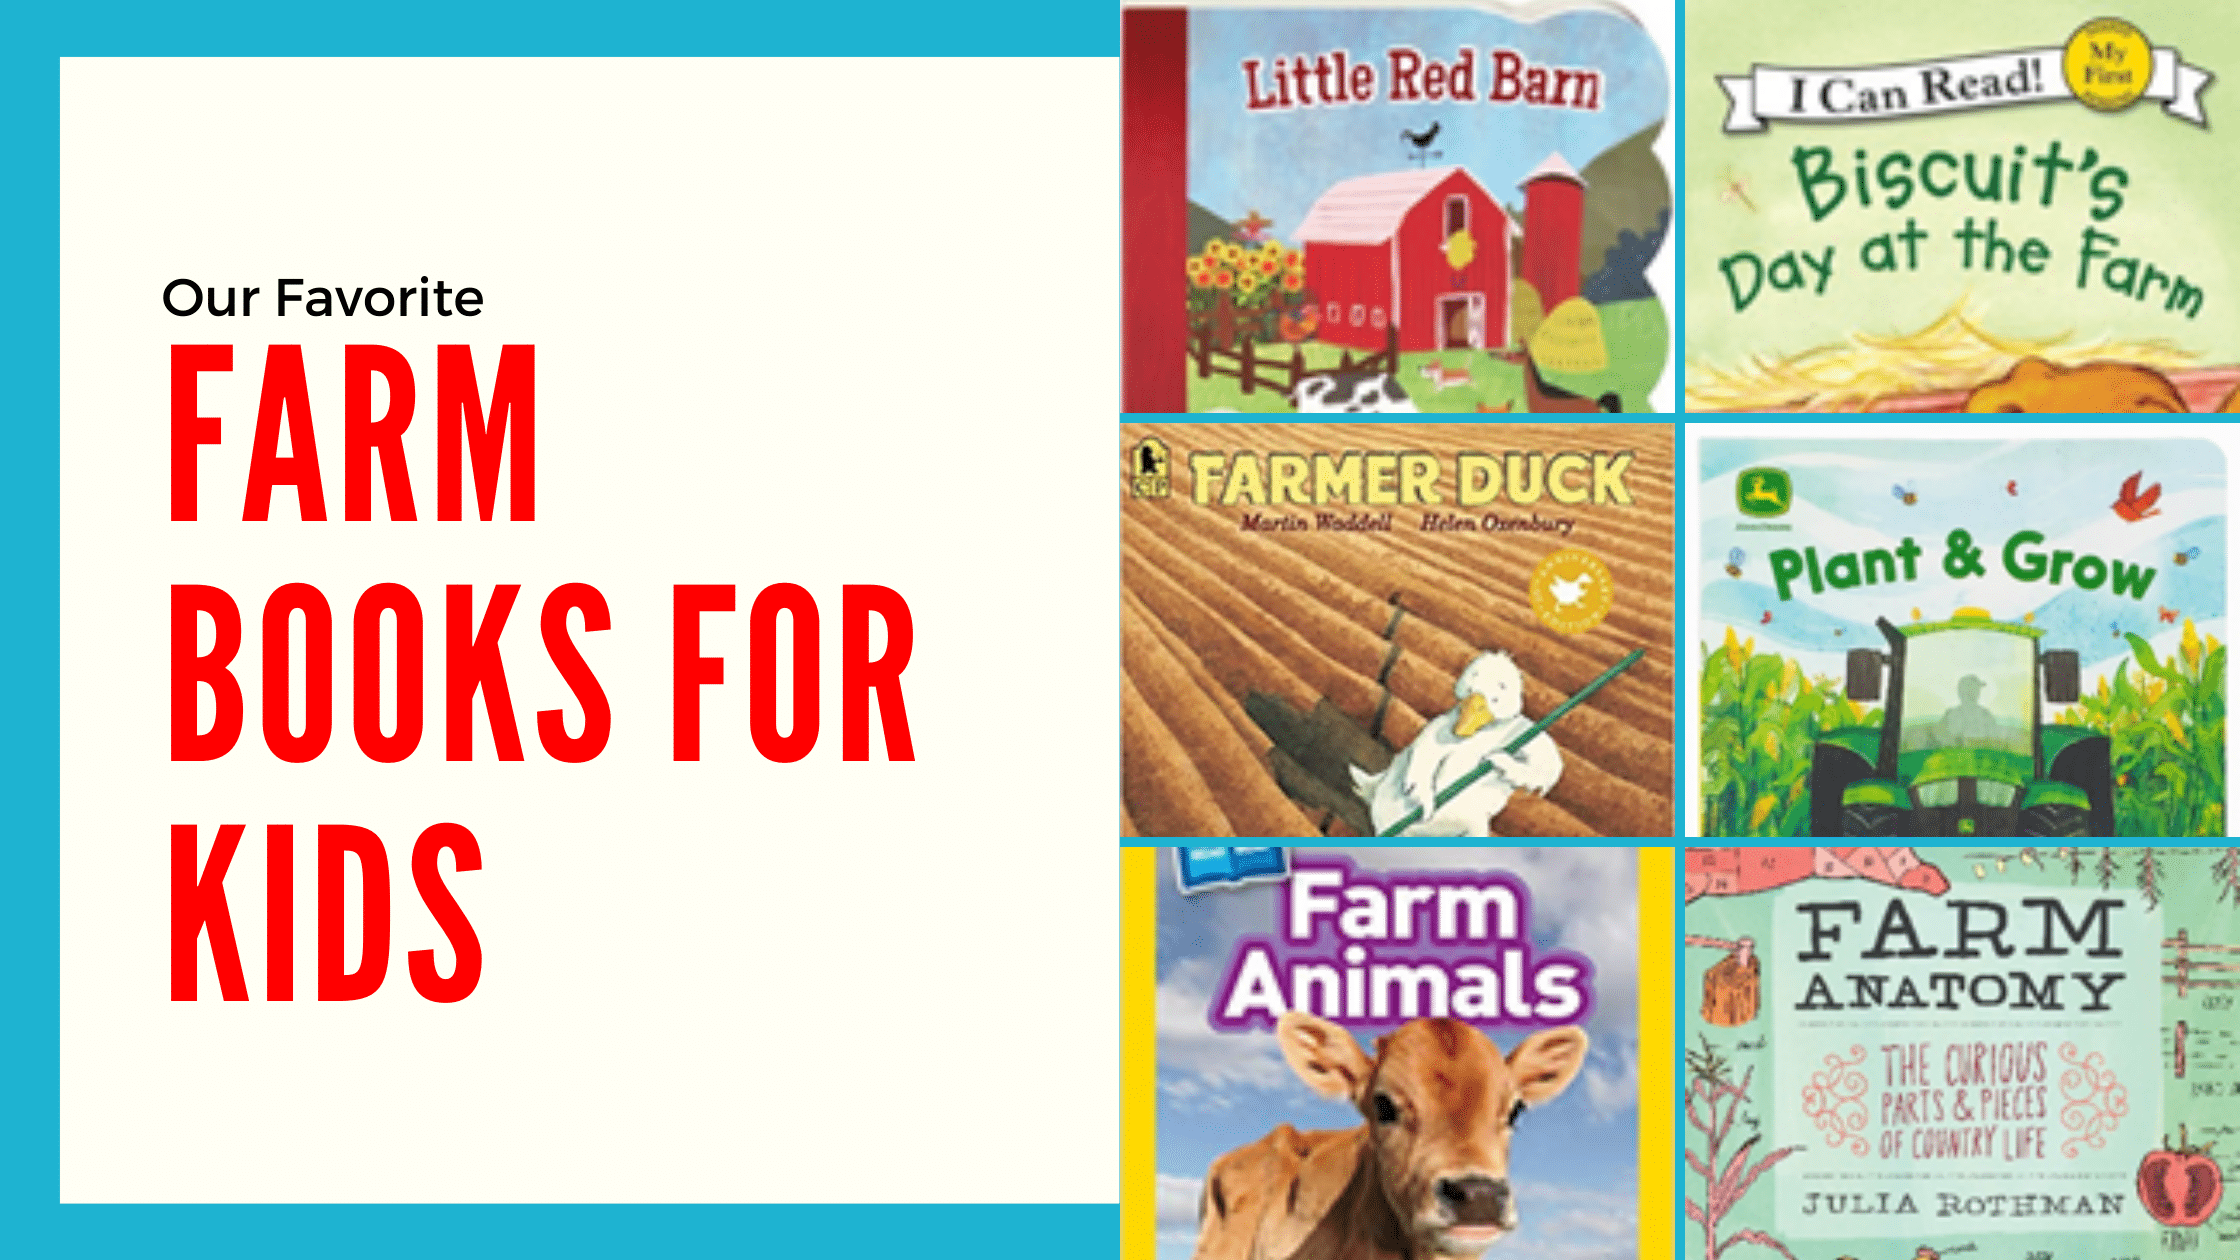 Our Favorite Farm Books for Kids